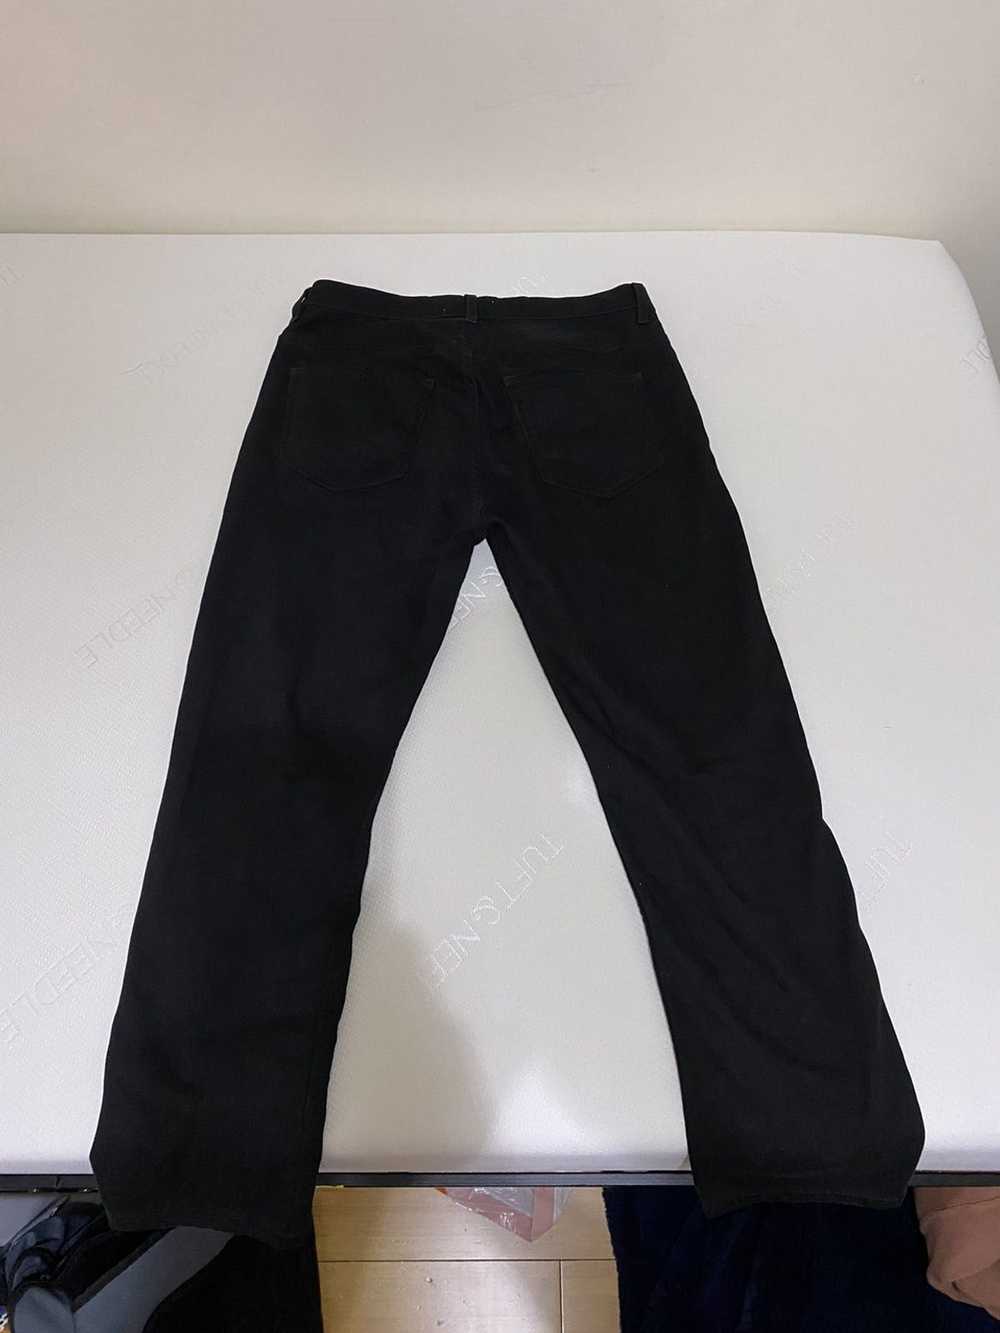 Acne Studios acne town jeans black fray cw - image 1